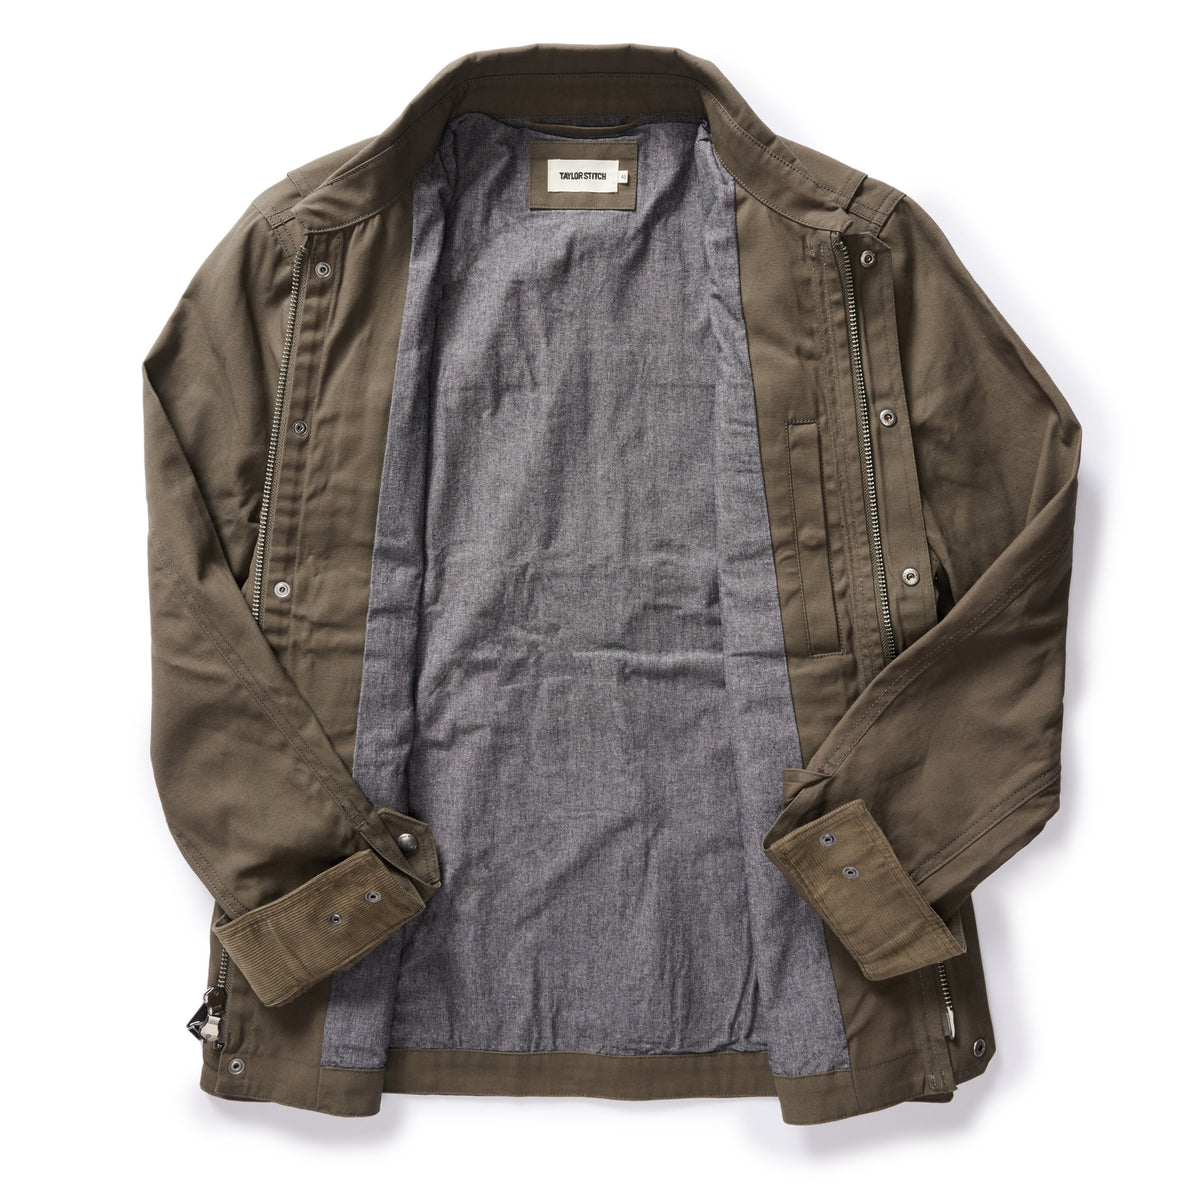 The Pathfinder Jacket in Fatigue Olive Dry Wax